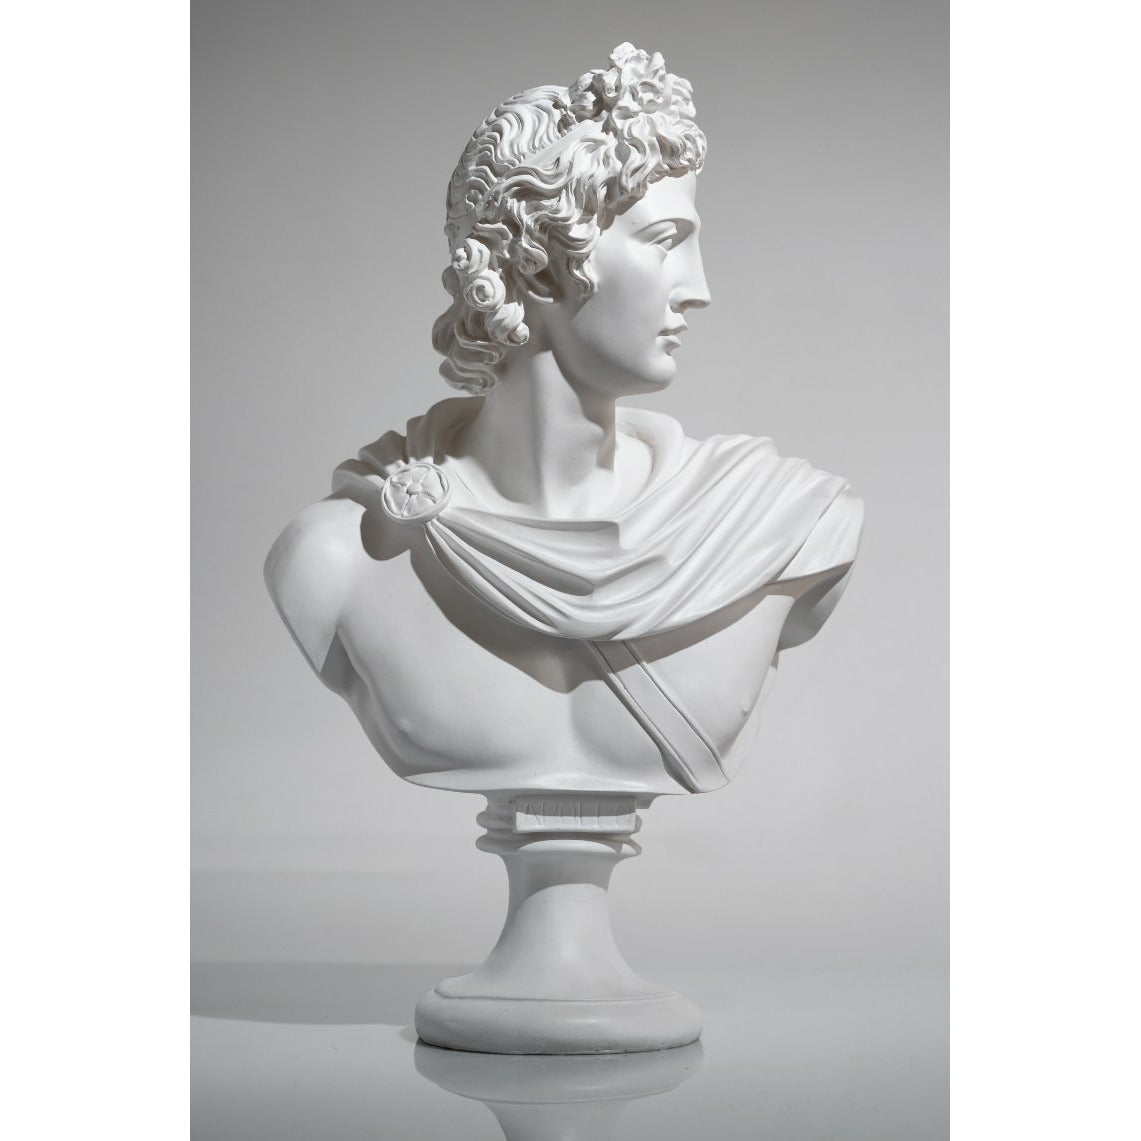 White Apollo Bust Sculpture - Our White Apollo Bust Sculpture is a timeless piece that’s an icon of Greek and Roman mythology.